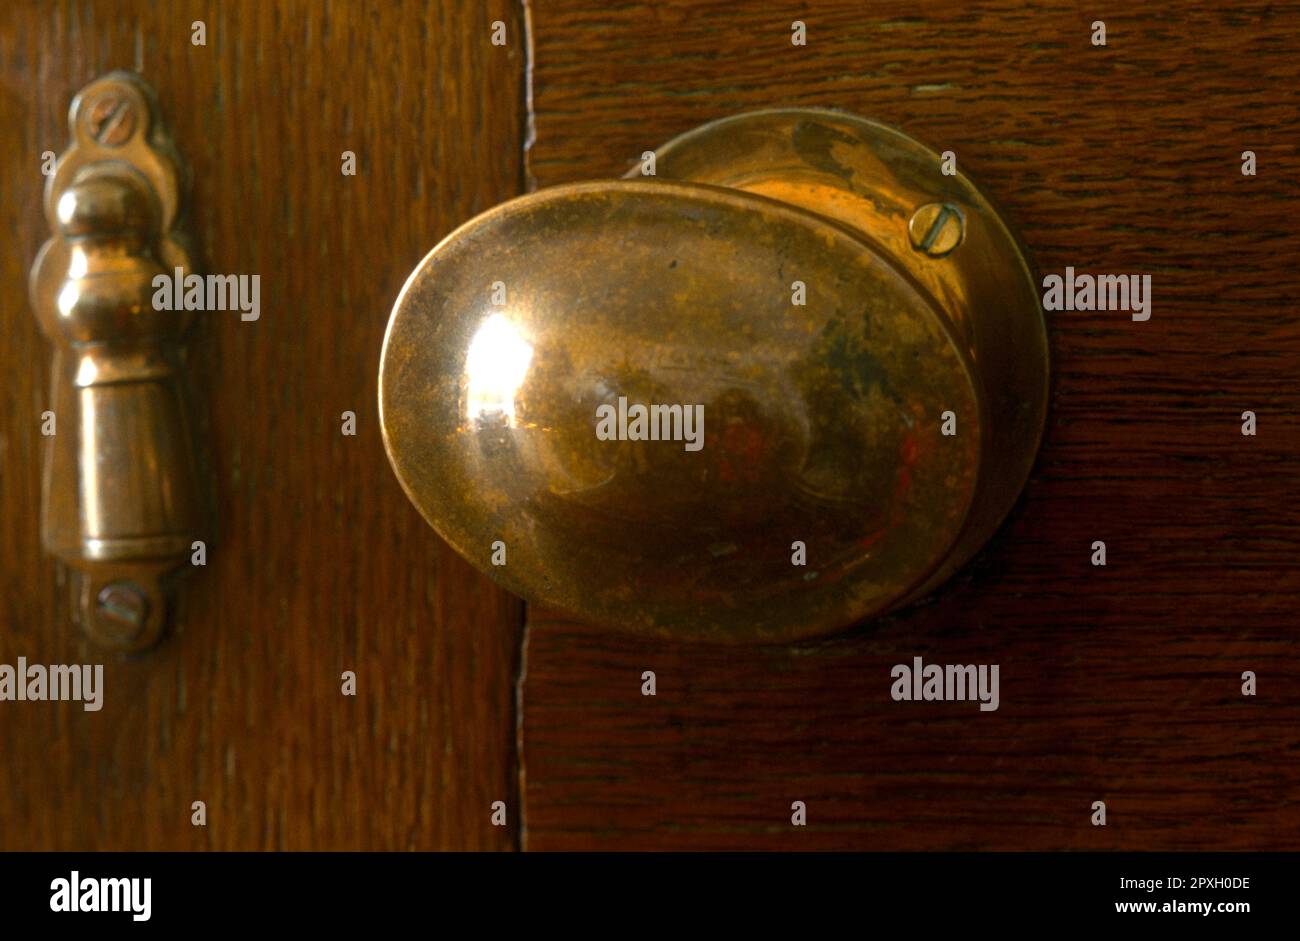 Close up of Brass Door Knob And Keyhole Cover On Wooden Door Stock Photo